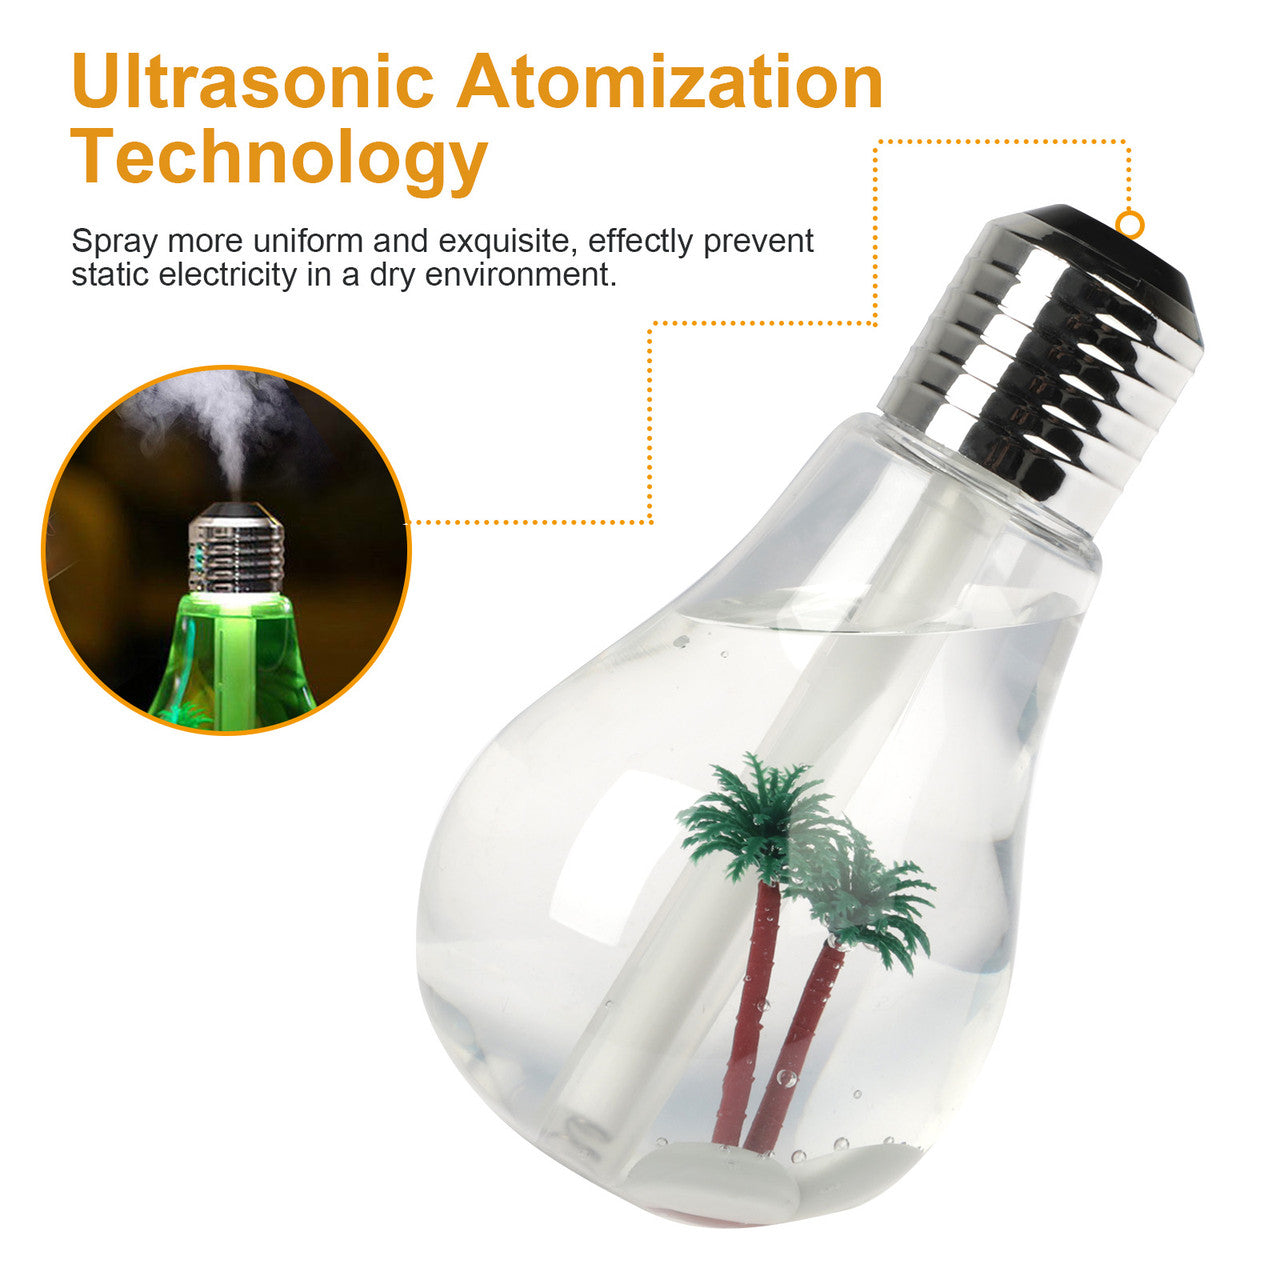 USB Colorful Bulb Humidifier for Home, Office, Dorm and More